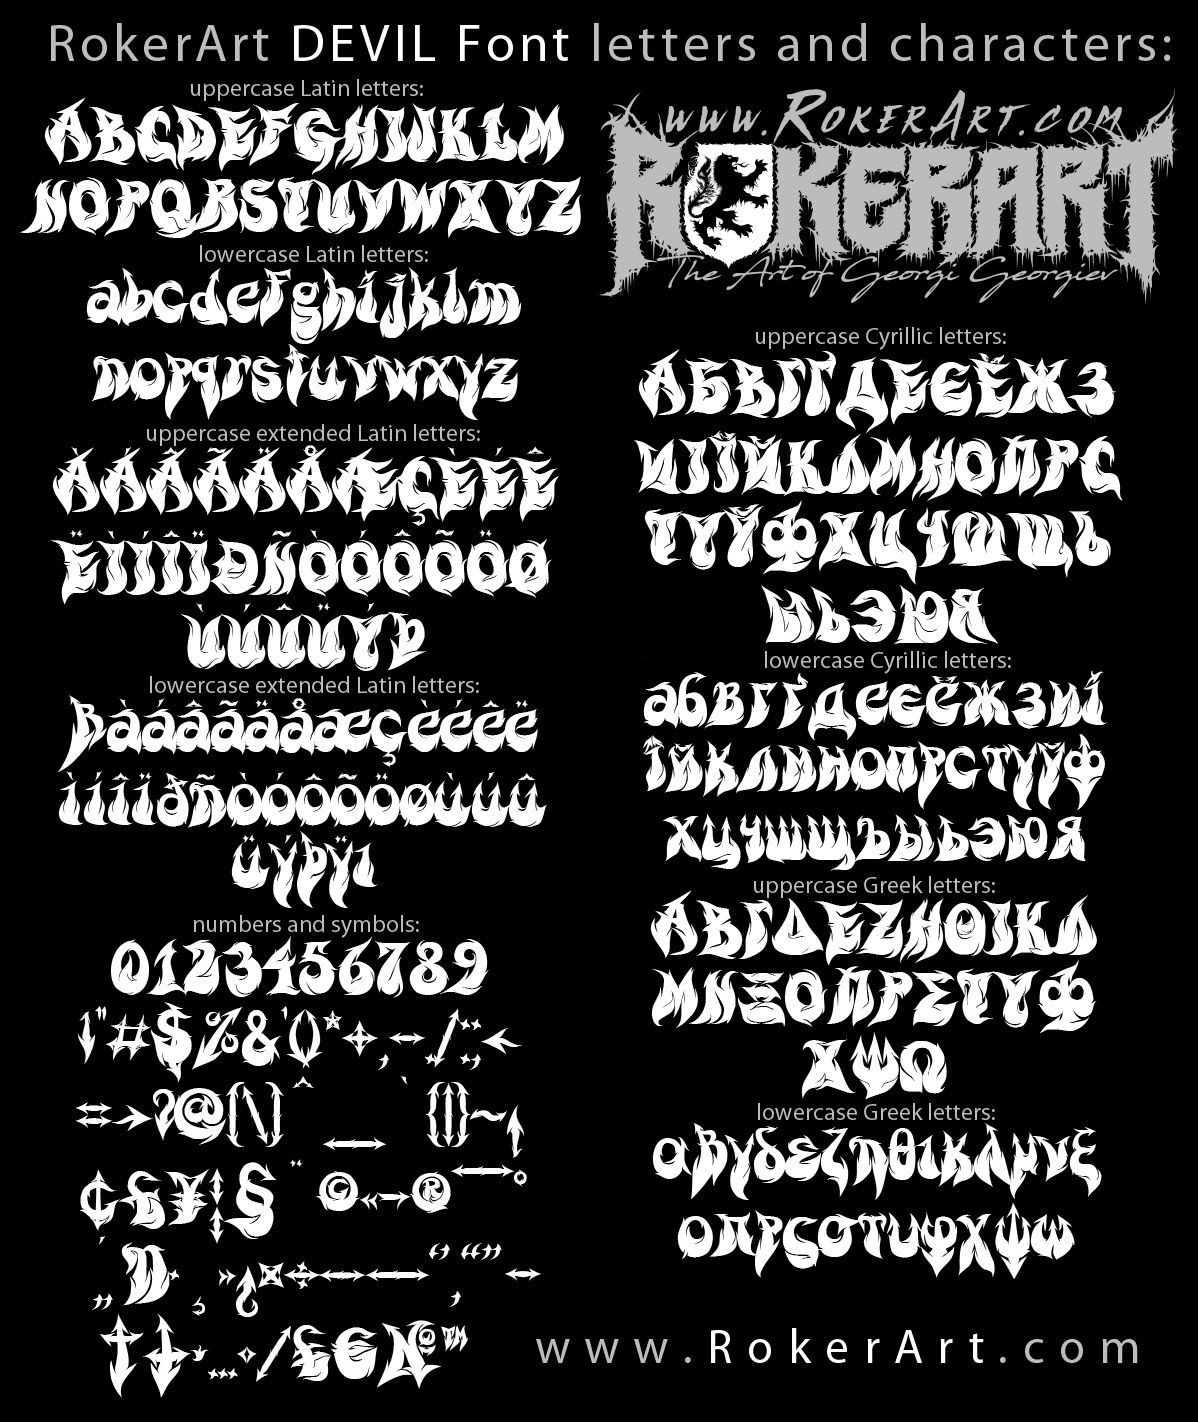 DEVIL Font letters and characters